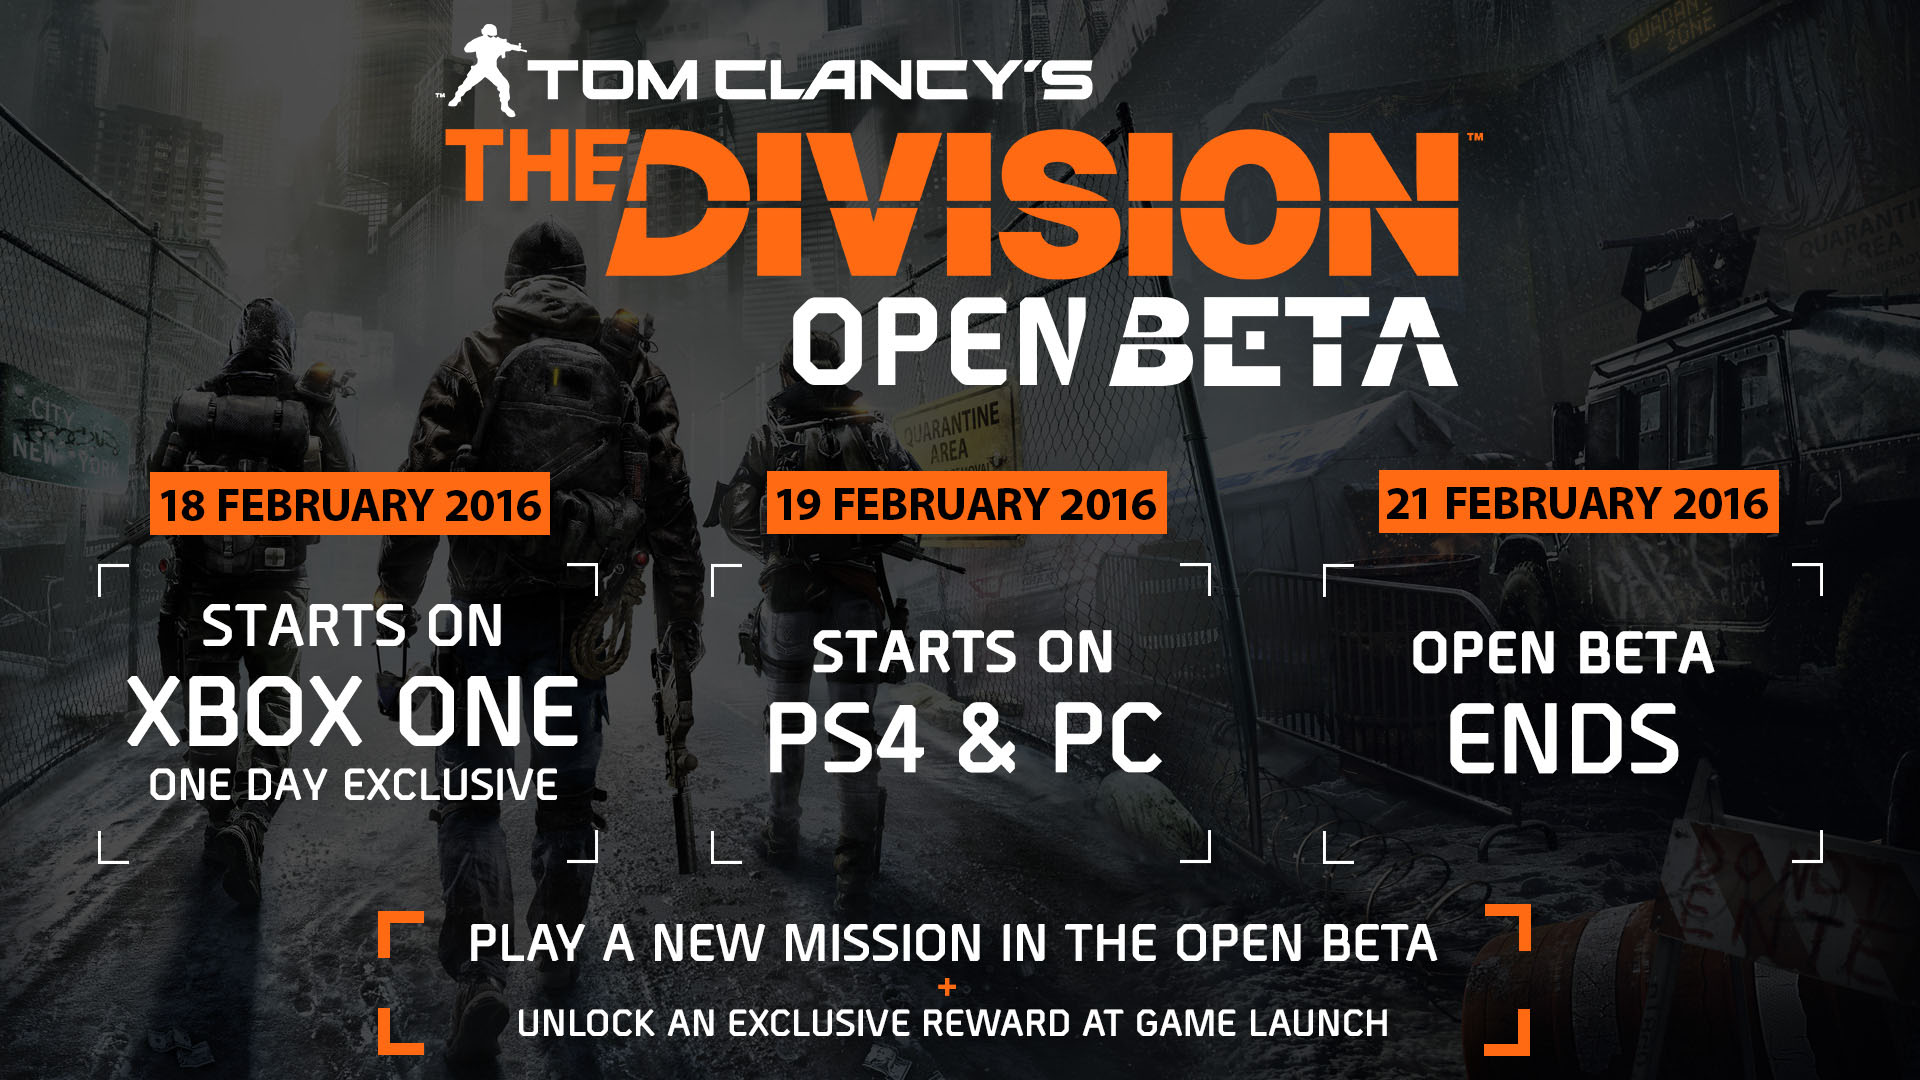 The Division open beta